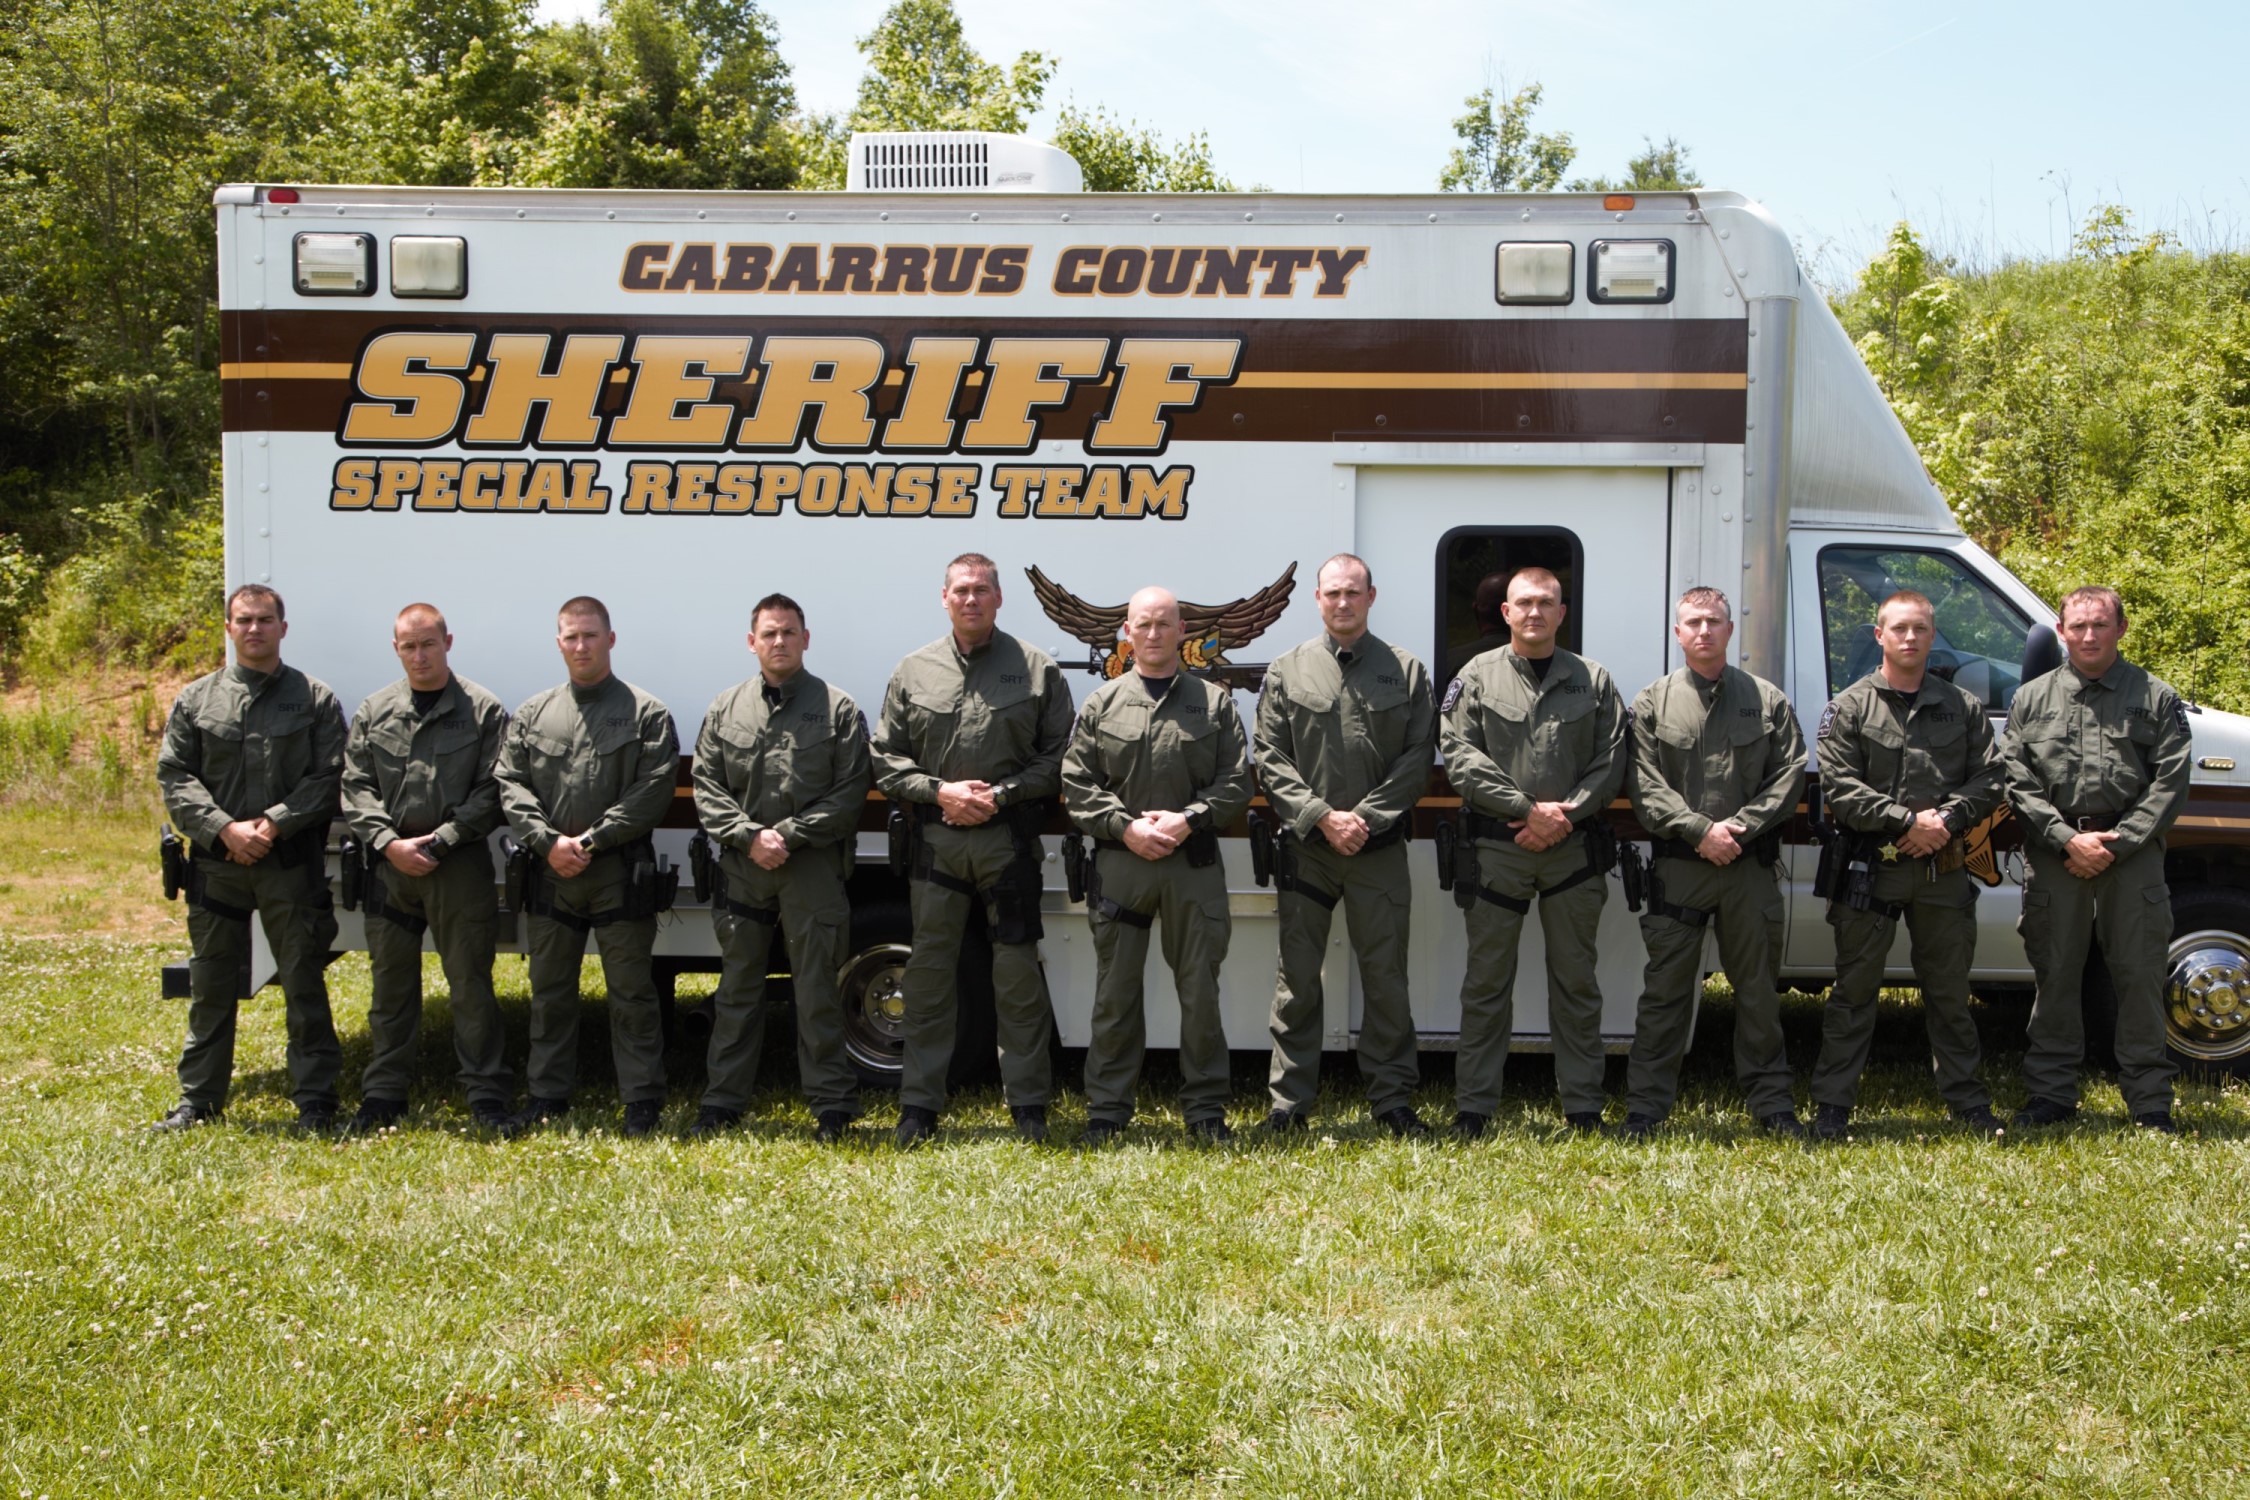 Picture of the team standing in front of the Cabarrus County Sheriff Special Response Team truck